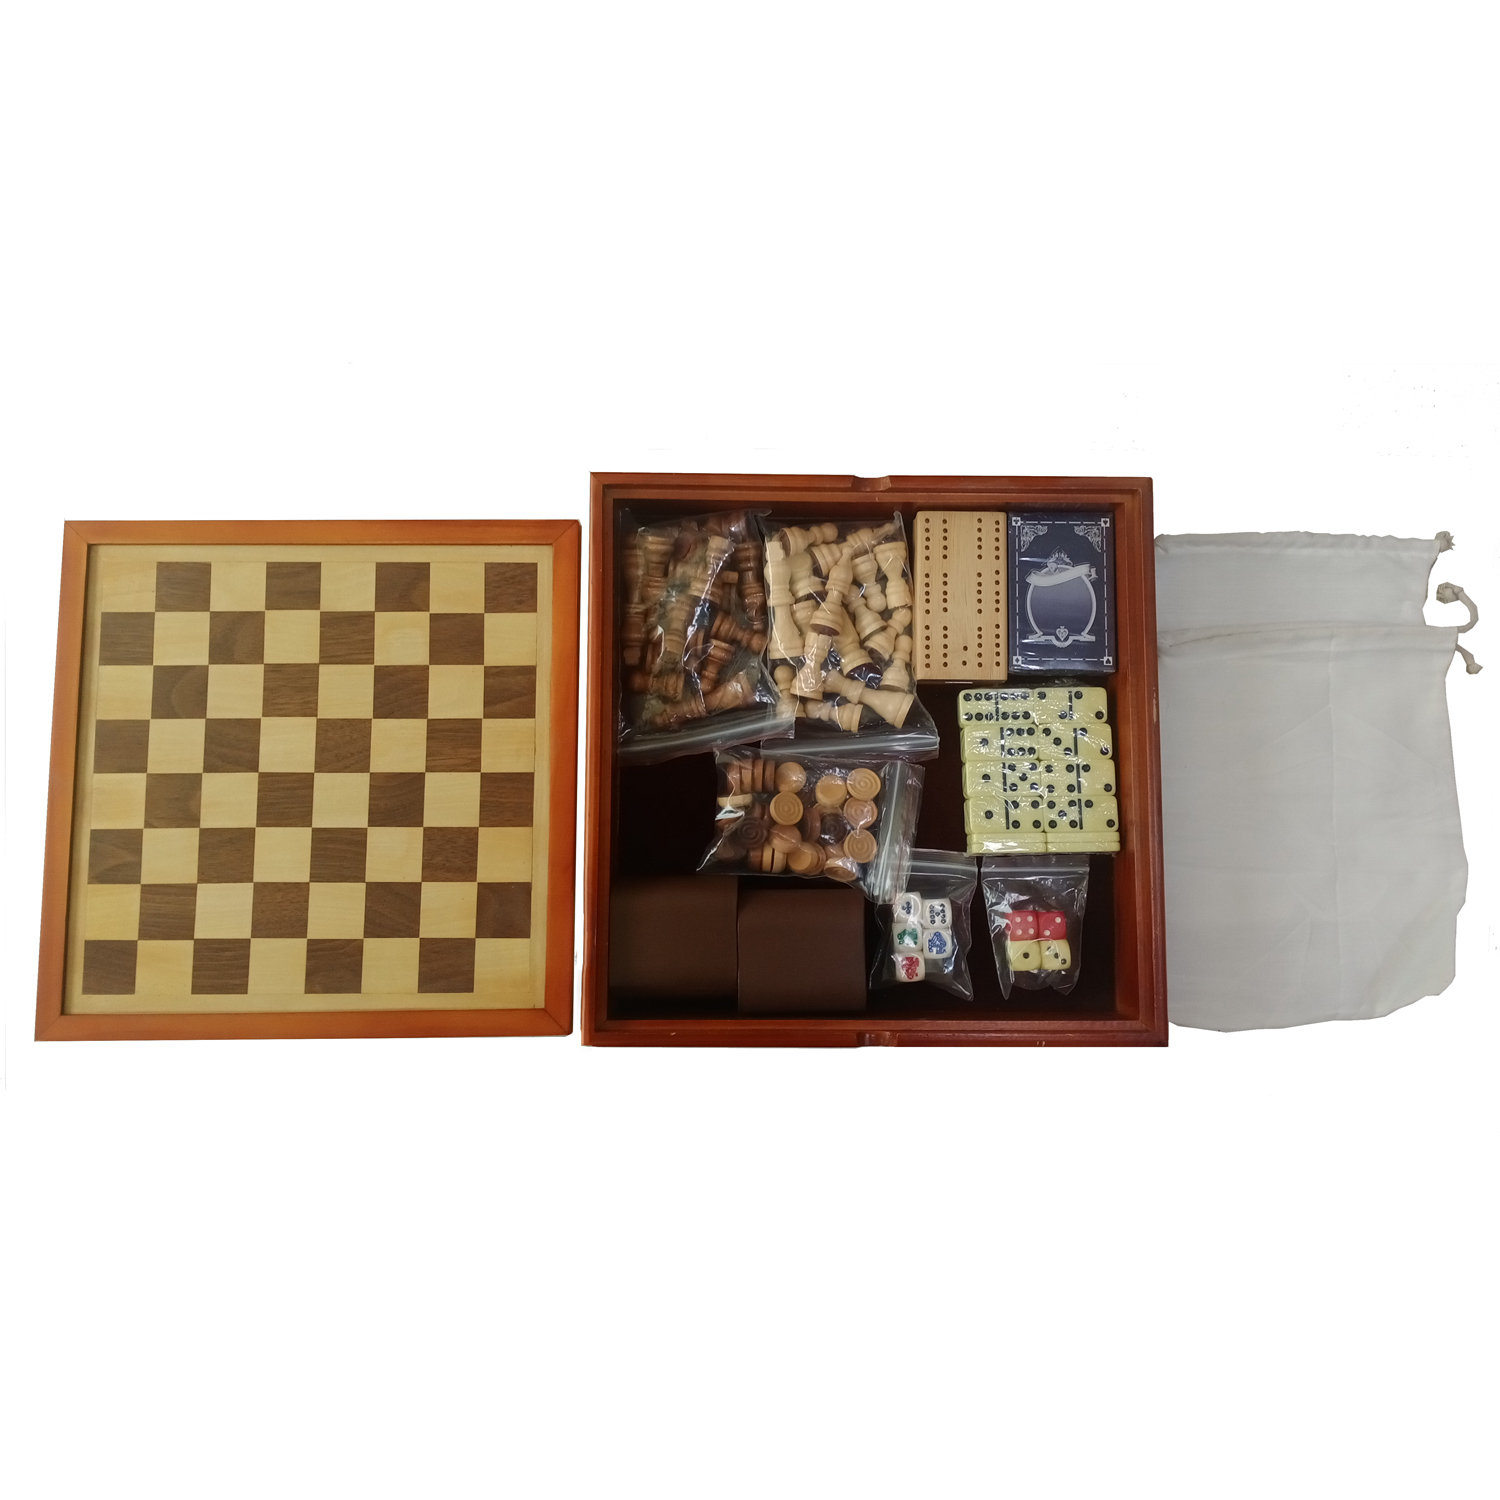 7-in-1 Combo Game by Hey! Play! (Chess, Checkers, Ludo